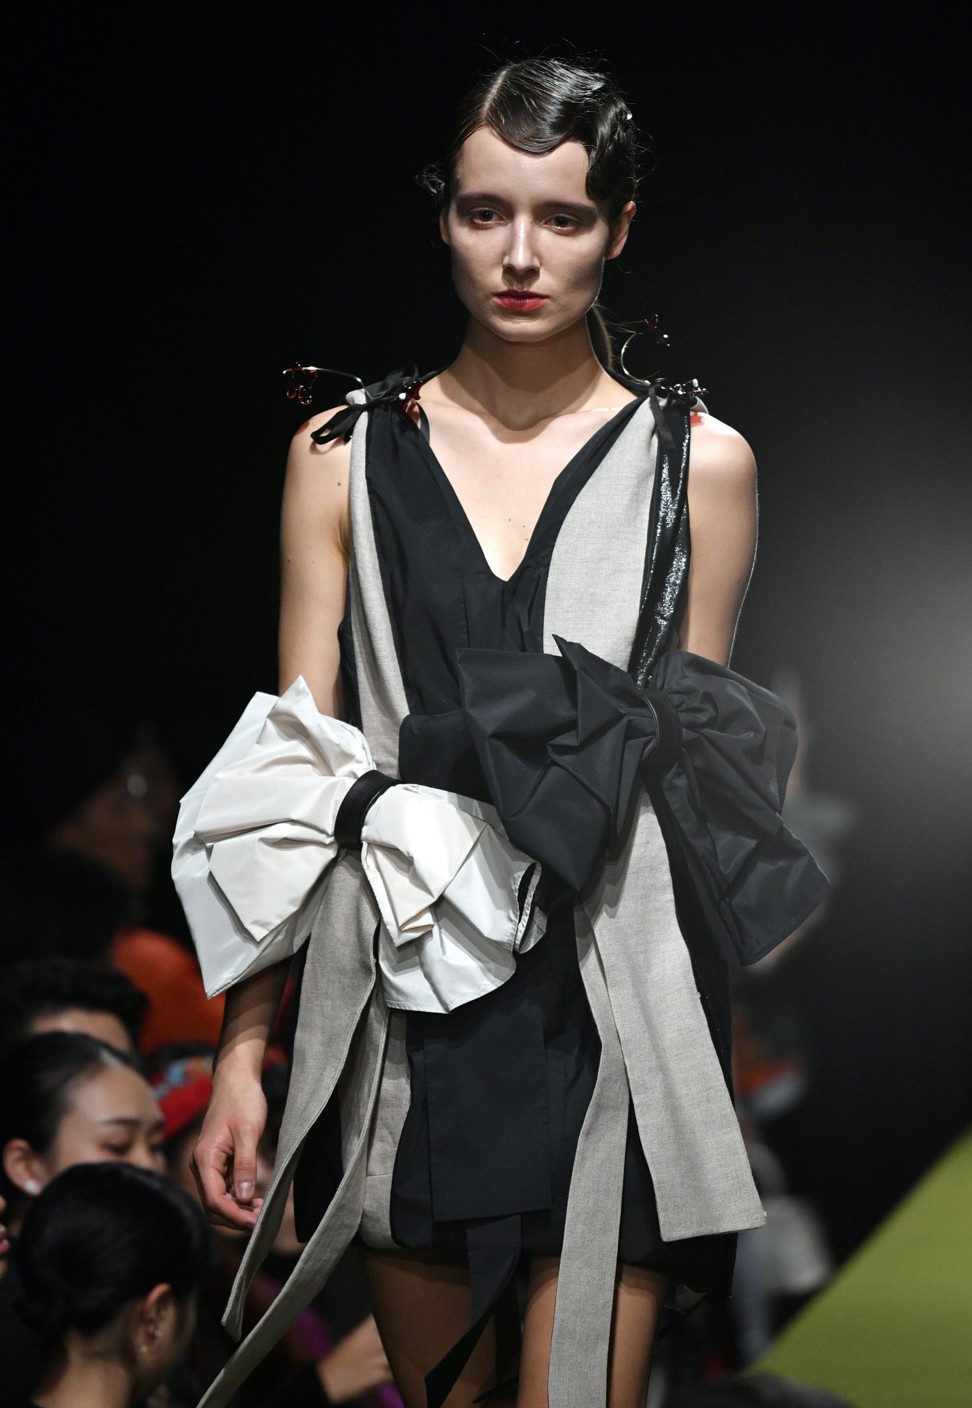 Tokyo fashion week showcases young Asian designers - and looks from 50 ...